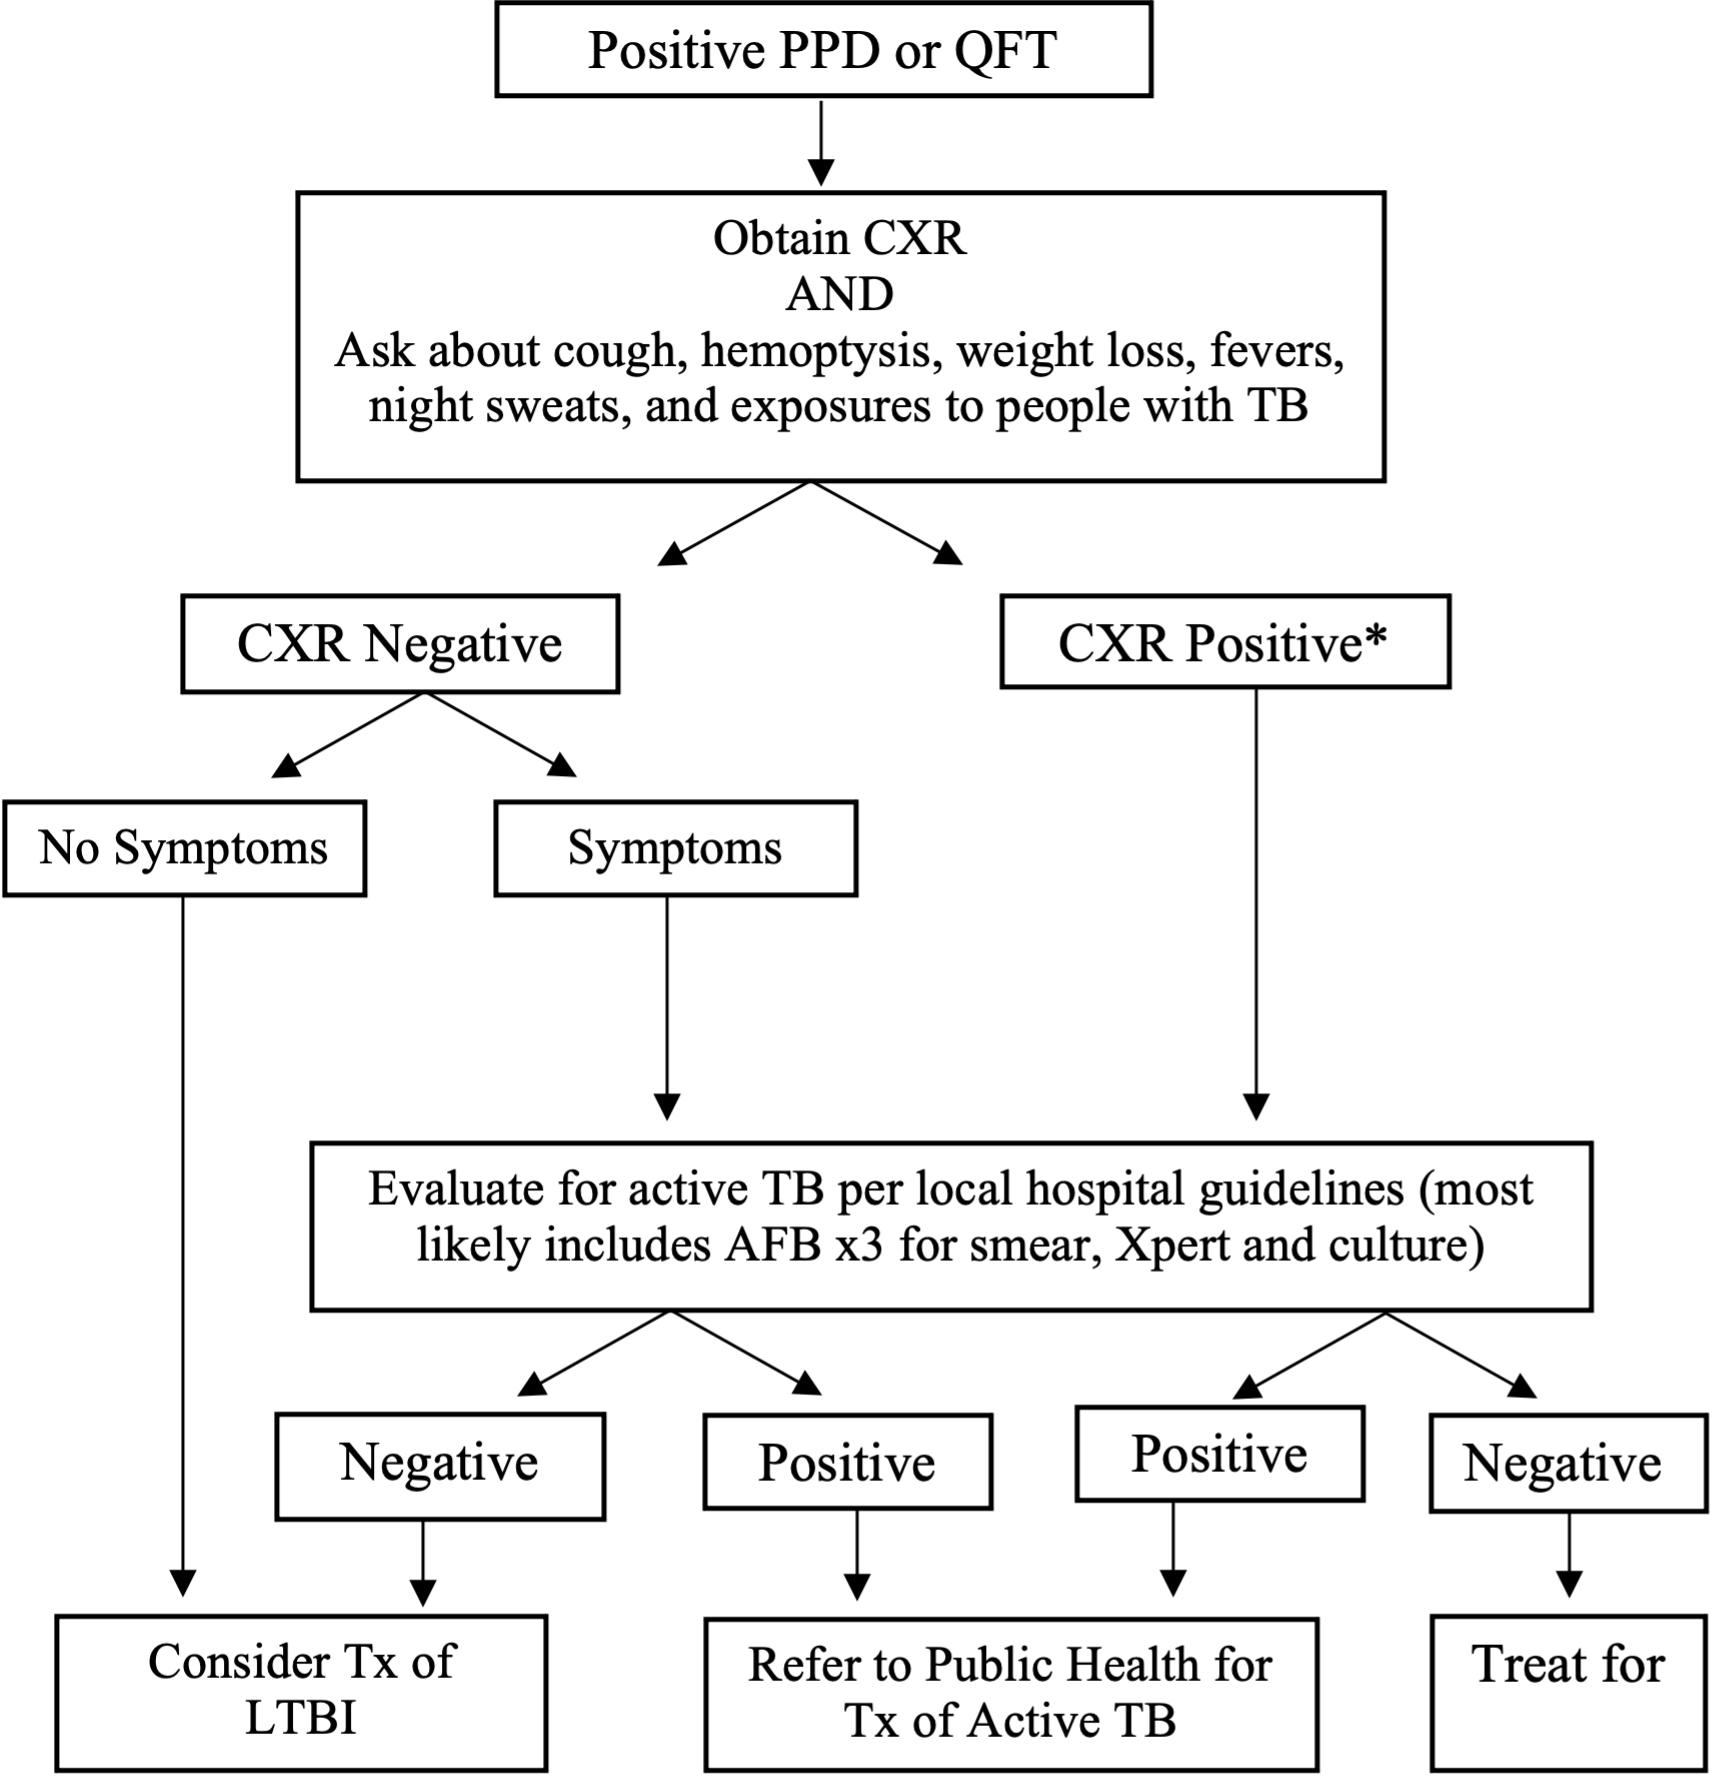 Management of Positive PPD or QFT